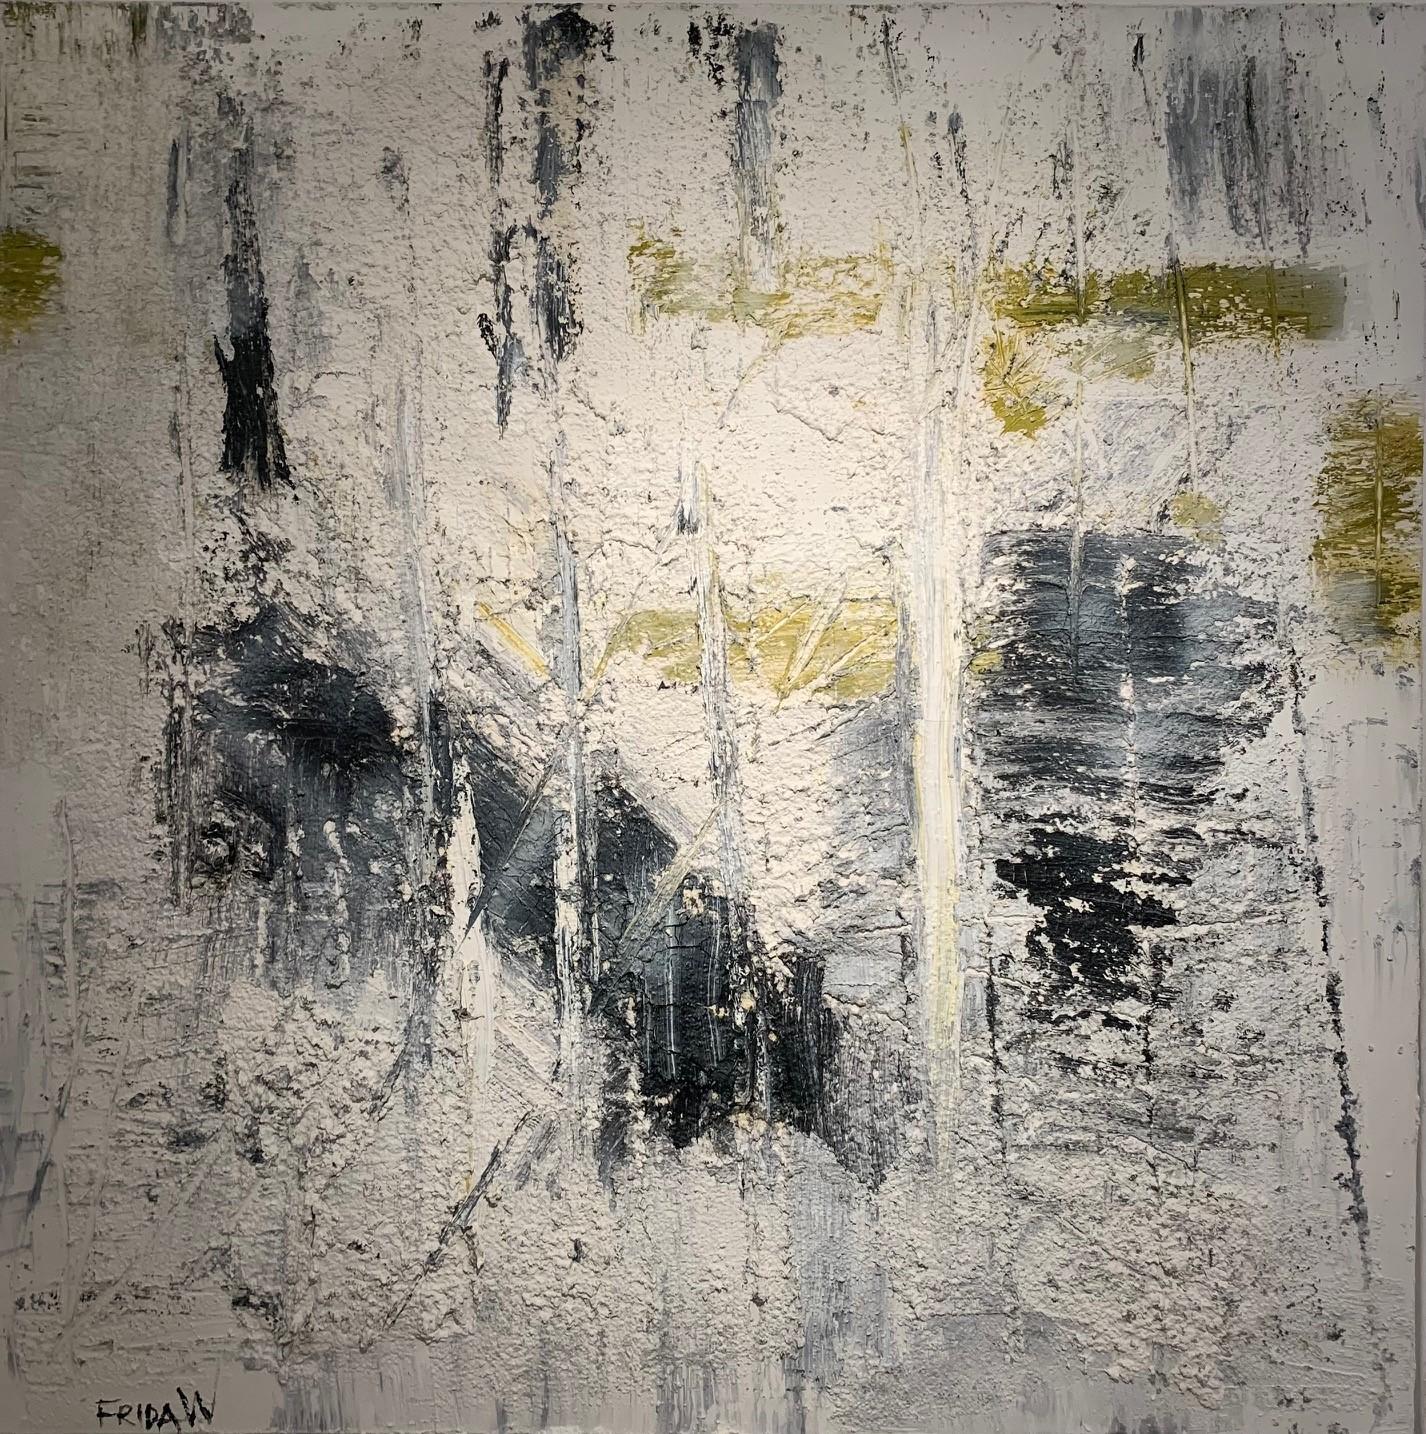 'Light' mixed media by Frida
Medium: oil, popcorn ceiling, and Gold leaves on canvas.

The painting comes with a certificate of authenticity and a letter of appraisal.

Abstract Art
An original piece, one of a kind.

This painting is shown in the